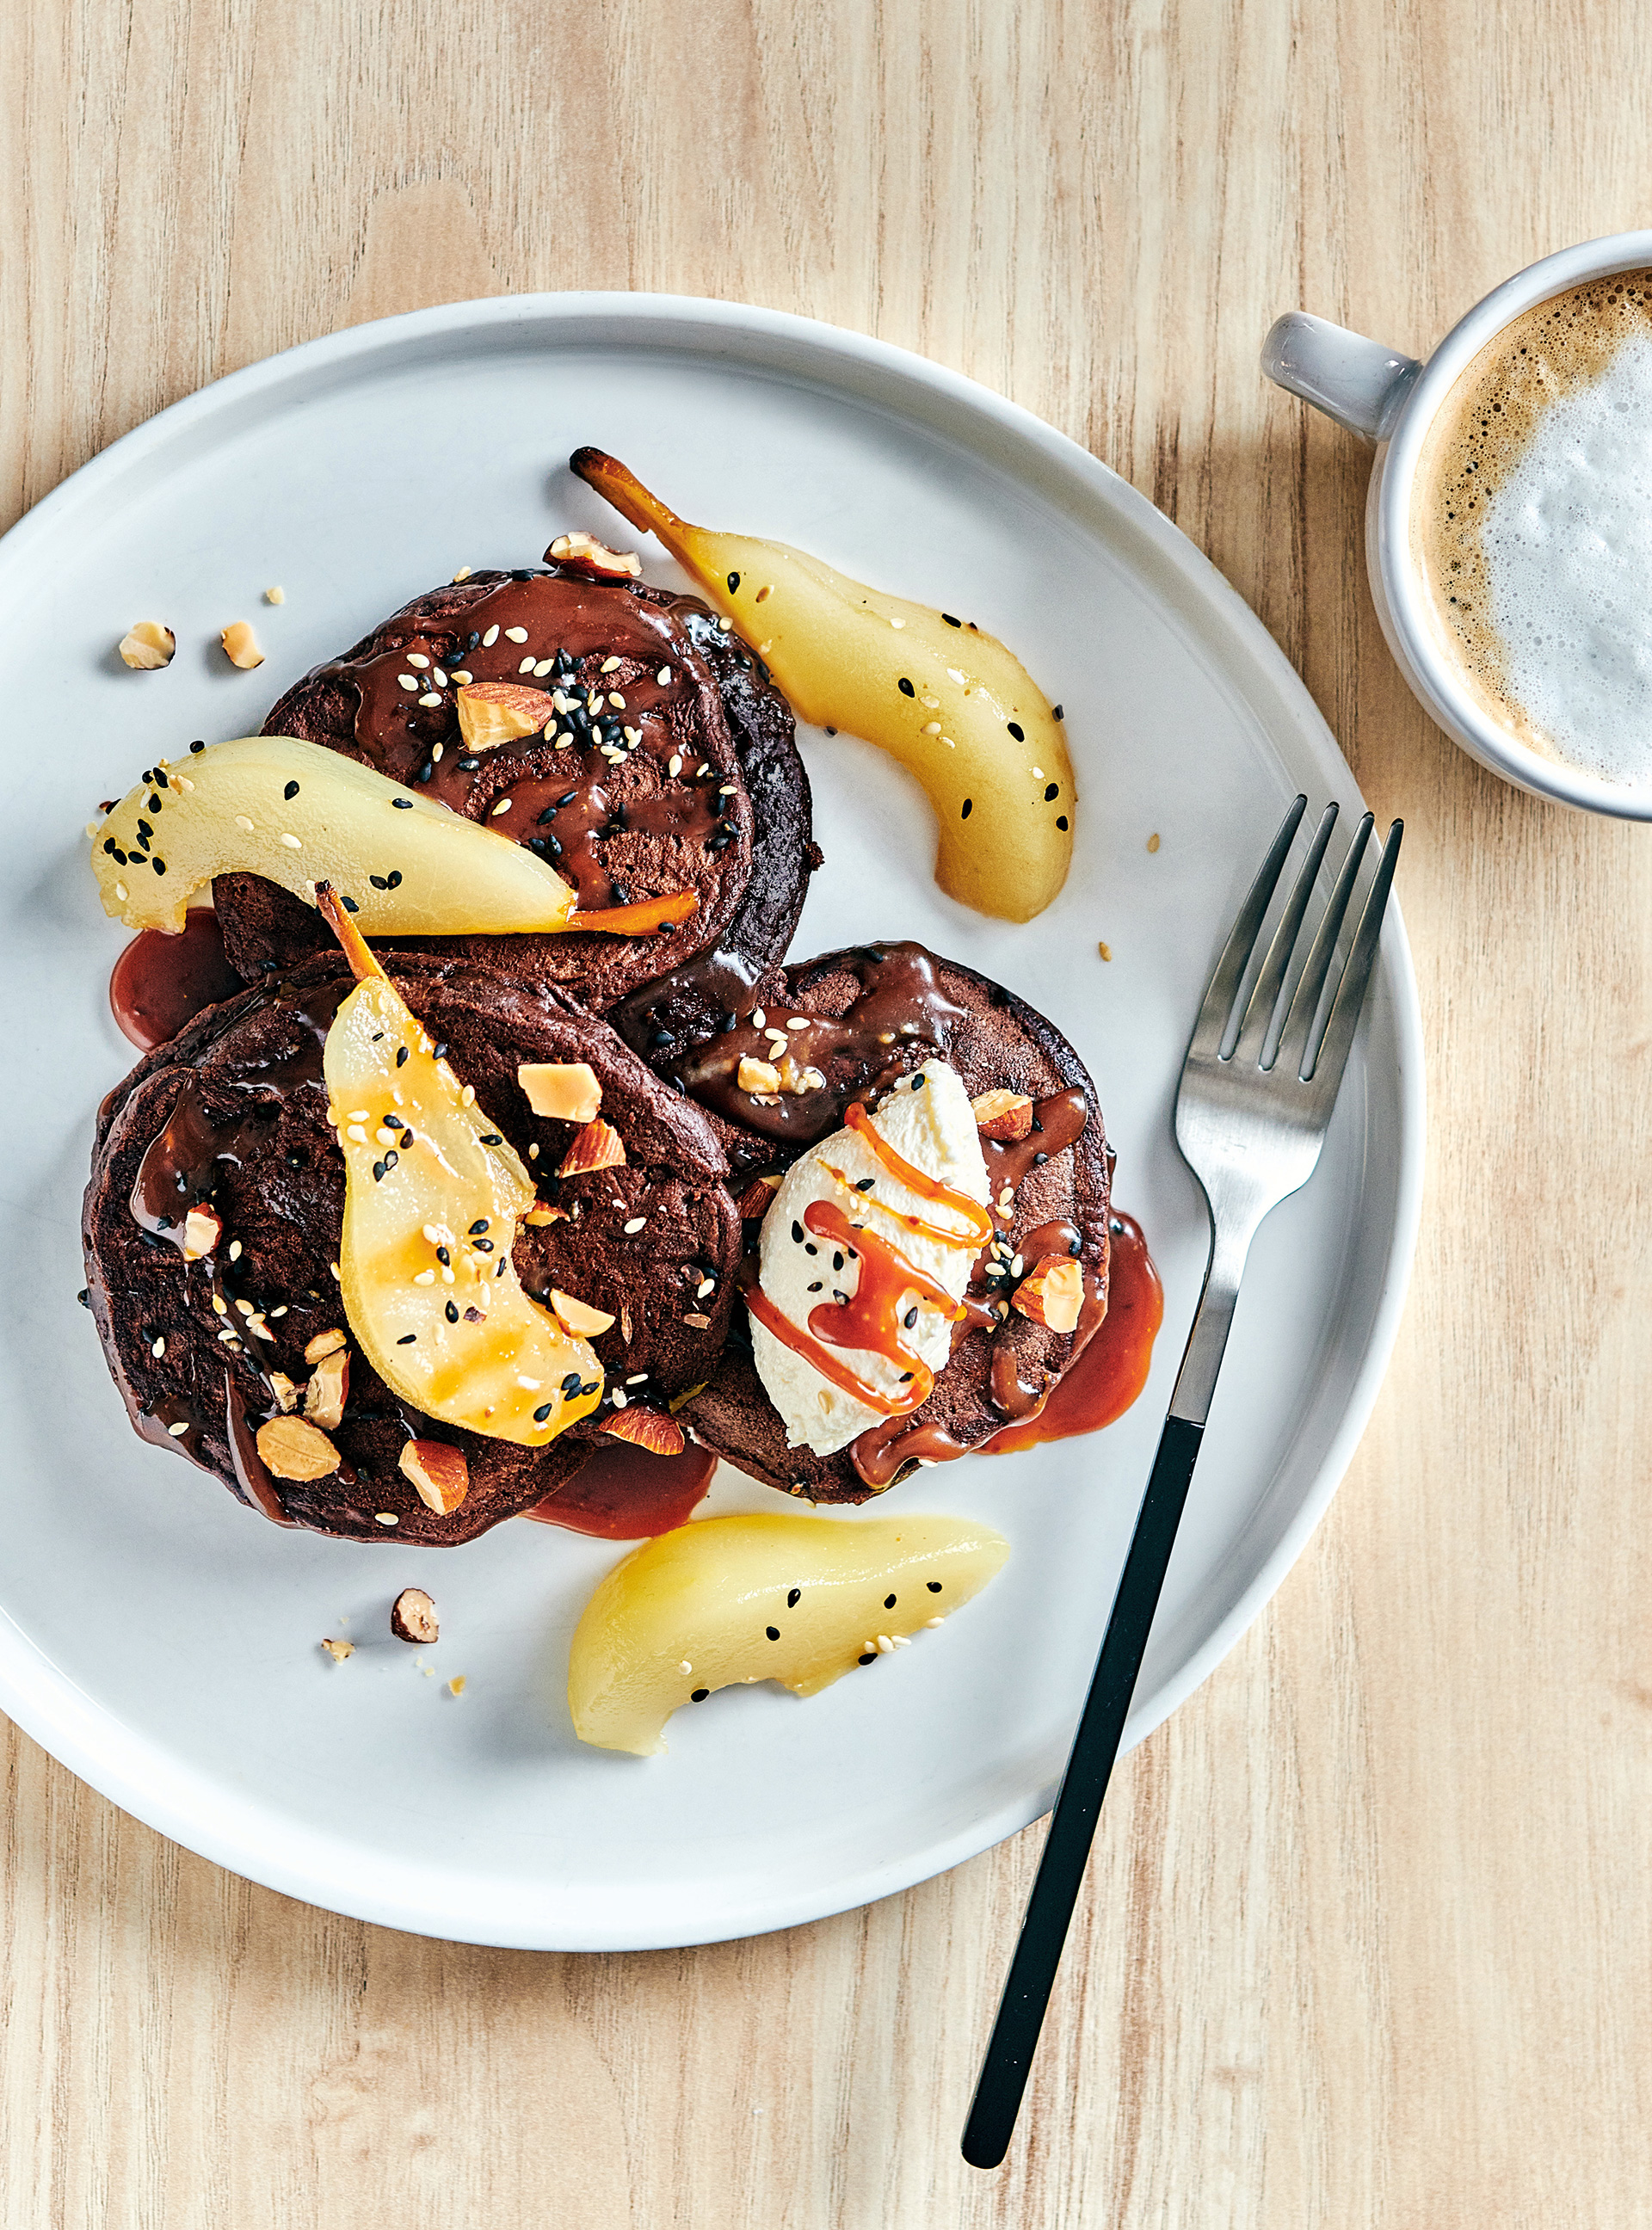 Chocolate Pancakes with Spiced Pears and Miso Caramel